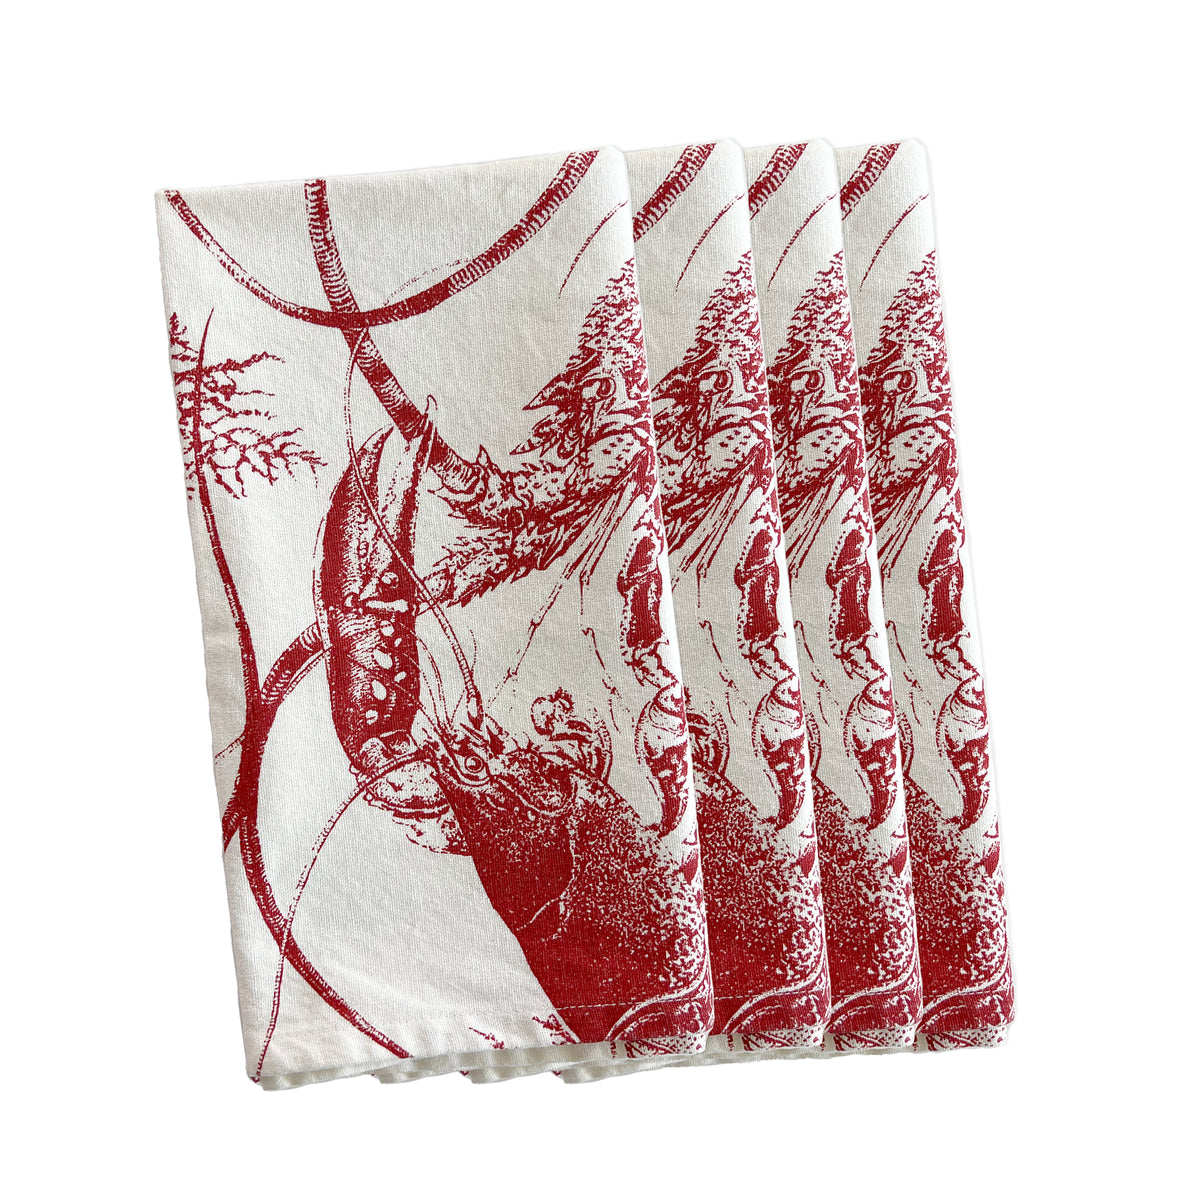 Red Lobsters 100% cotton napkins sold as a set of 4 from Caskata